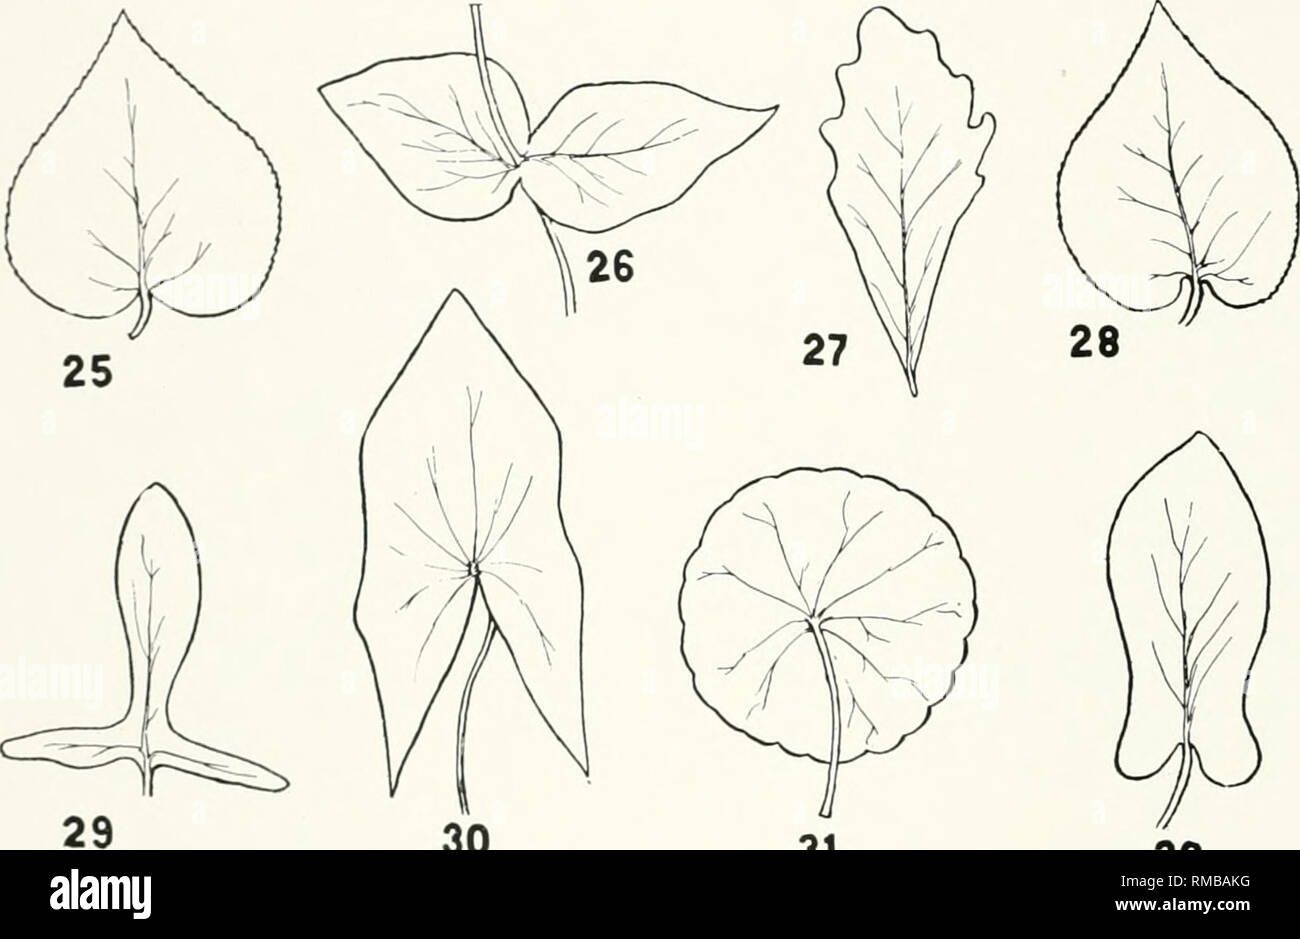 . Annual report. New York State Museum; Science -- New York (State); Plants -- New York (State); Animals -- New York (State). J , NEW YORK STATE MUSEUM Mucronate; when the apex is terminated by a short blunt tip (figure 23)- Cuspidate; when the tip of the blade is hard and stiff (figure 24J. Terms applied to the base of the leaf: The temis truncate, acuminate, acute, obtuse (defined above) may also be applied to the sliape of the base of the leaf blade, in addition to the following:. 30 31 32 Cordate; heart-shaped (figure 25). Cuneate, or wedge-shaped; when the sides of the leaf blade taper to Stock Photo